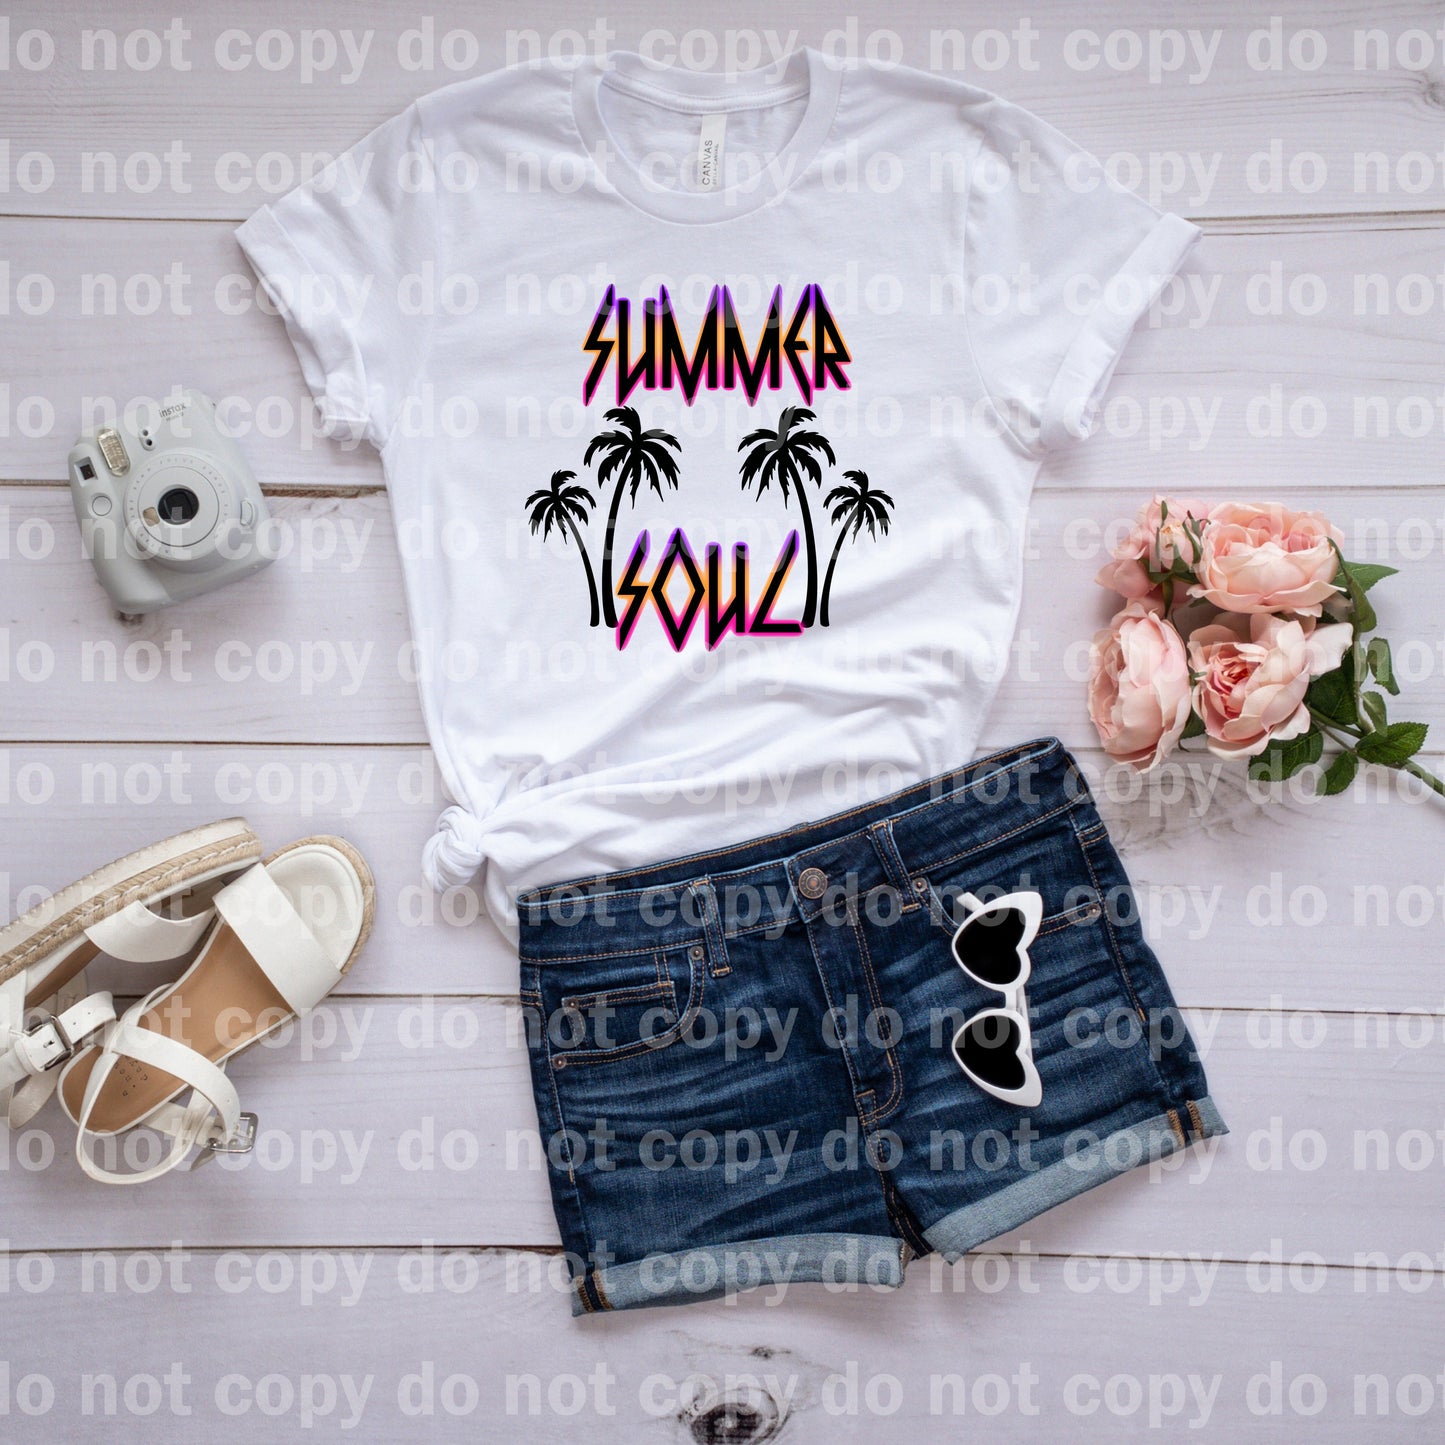 Summer Soul Full Color/One Color Dream Print or Sublimation Print